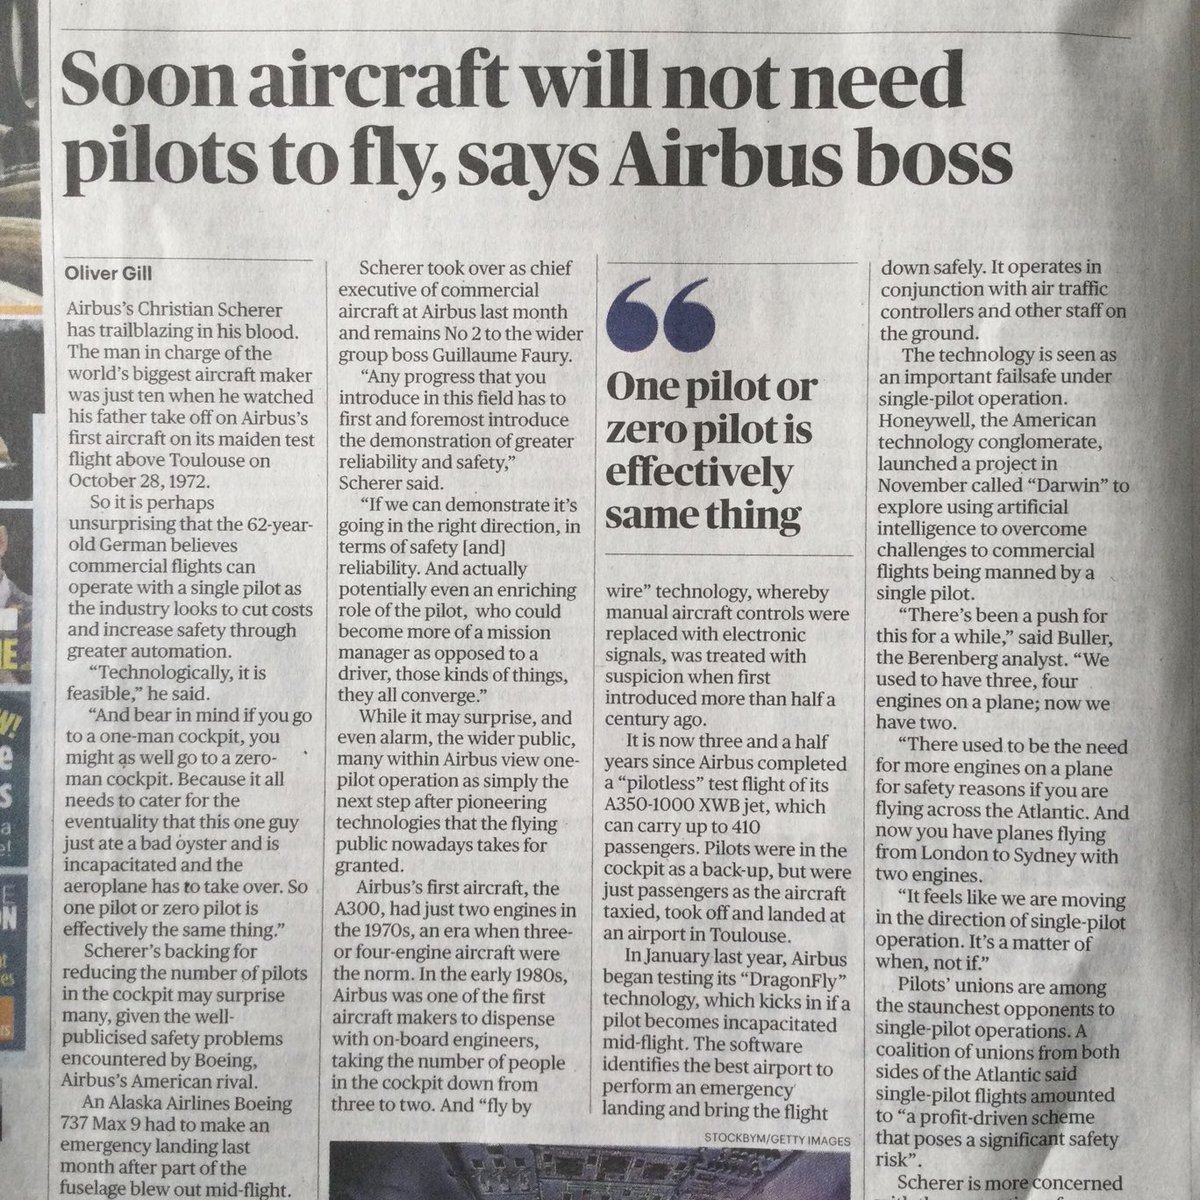 Todays Sunday Times | Another profit driven scheme that moving towards a single-pilot operation that poses a significant safety risk. You only have to look at the ongoing safety problems at Boeing.